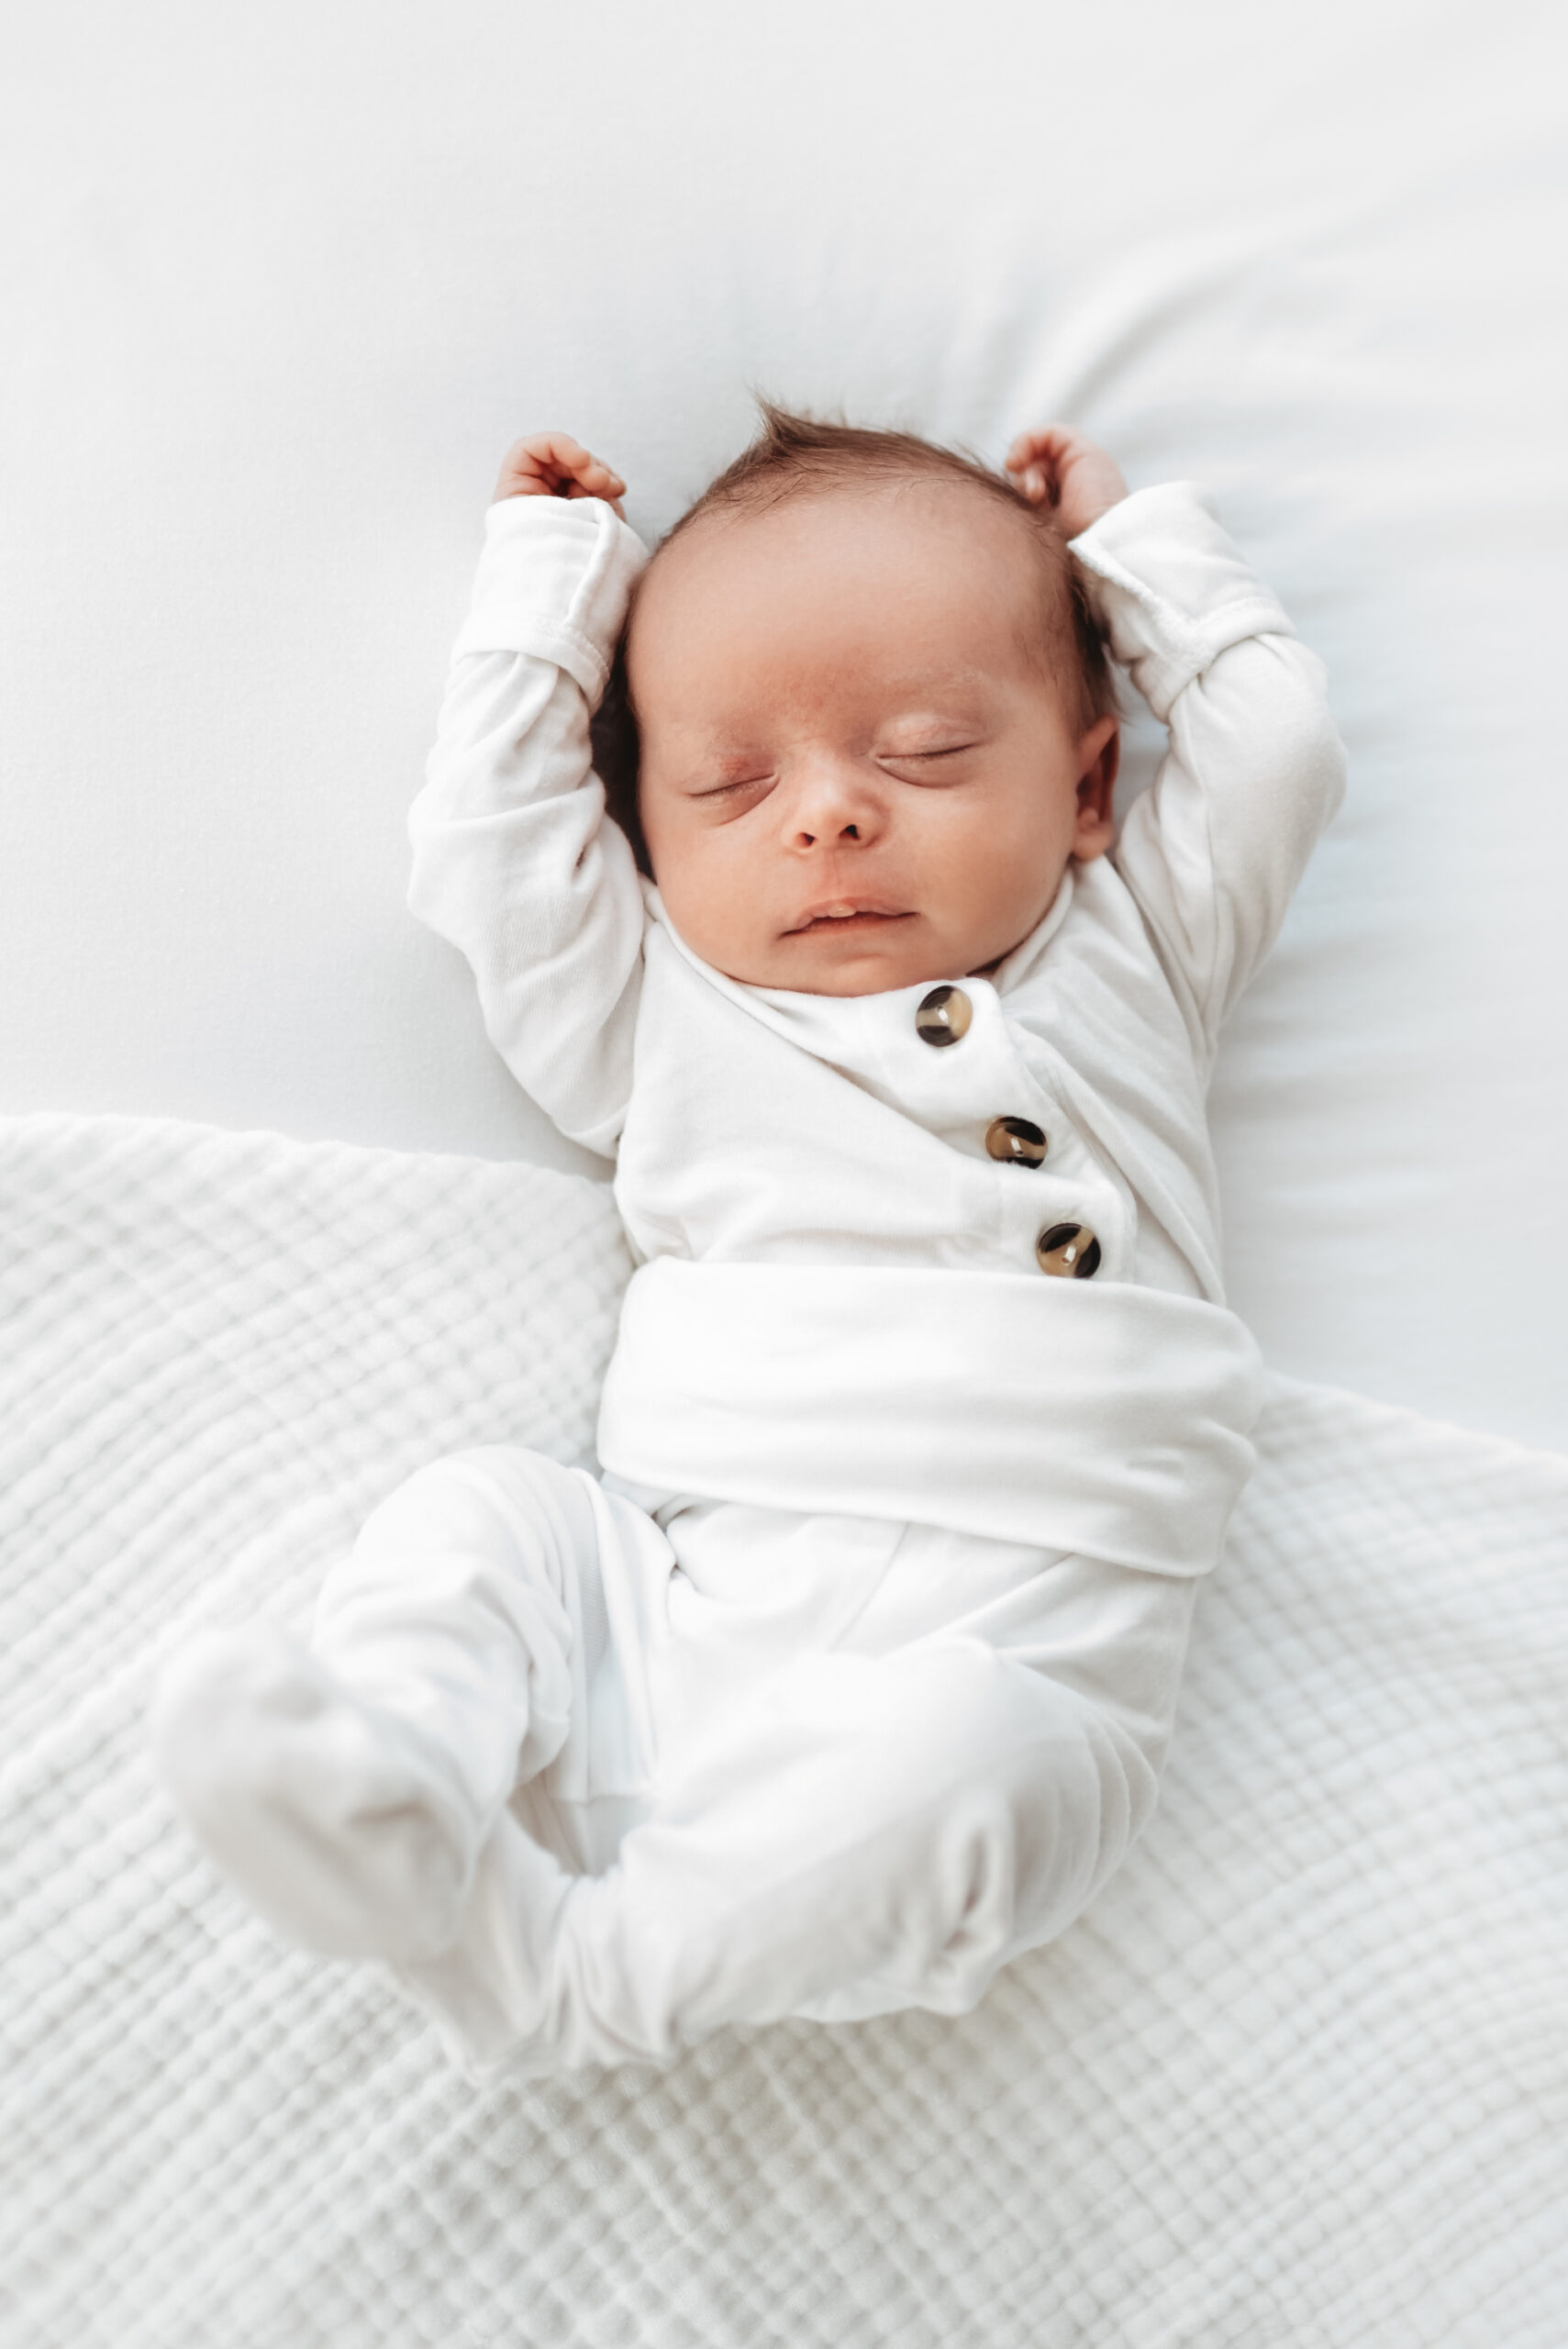 rocky mountain sleeping baby stretching arms on bed